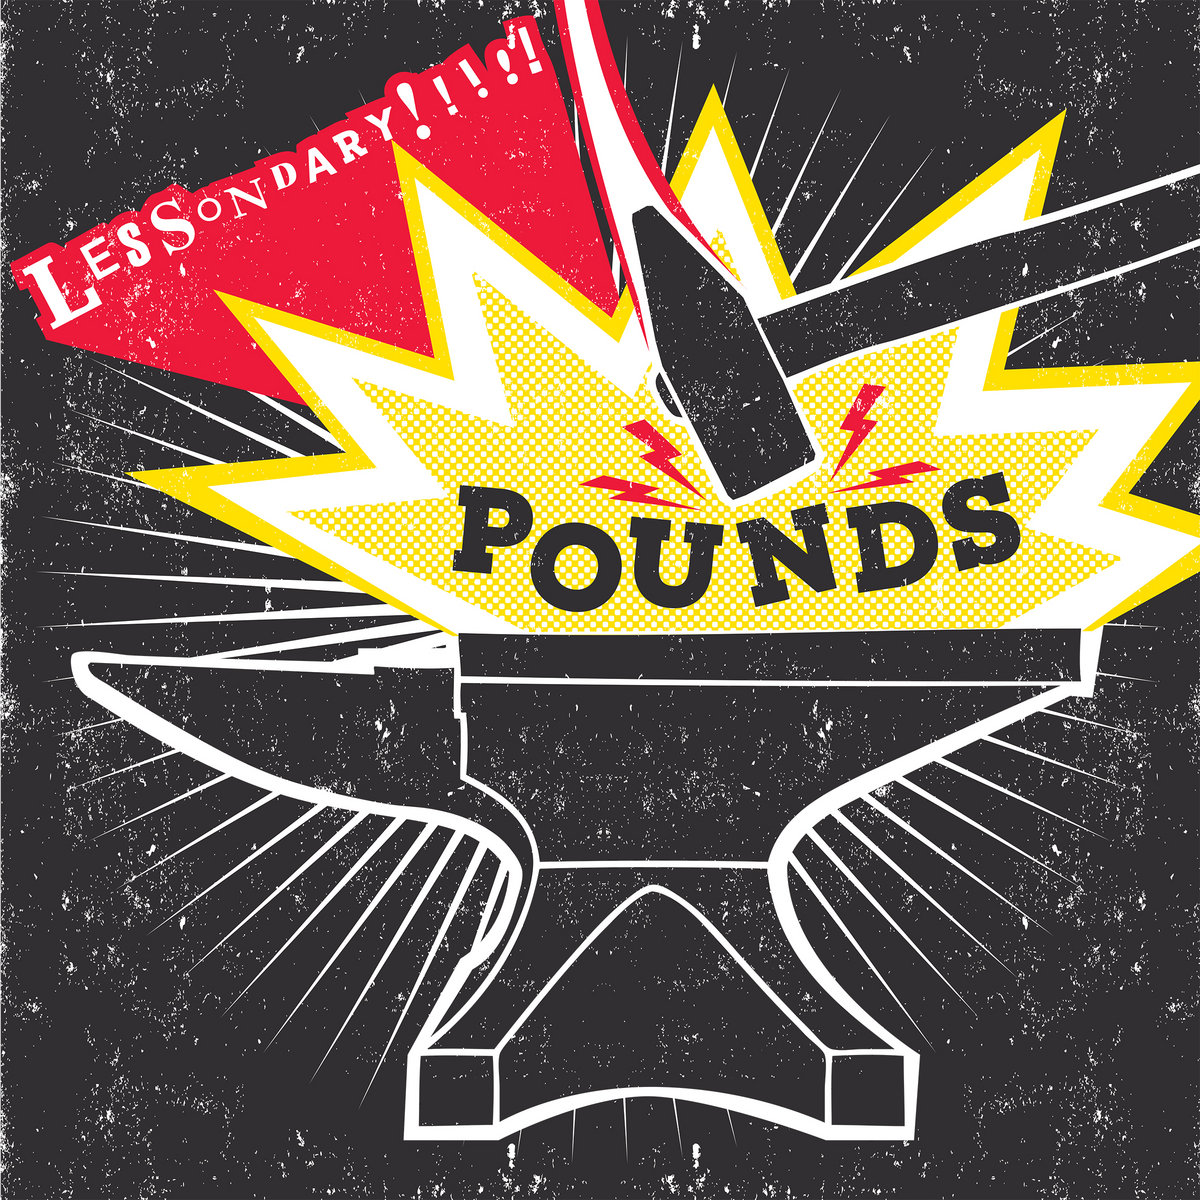 The Lessondary Collective Drops 'POUNDS' Beat Tape